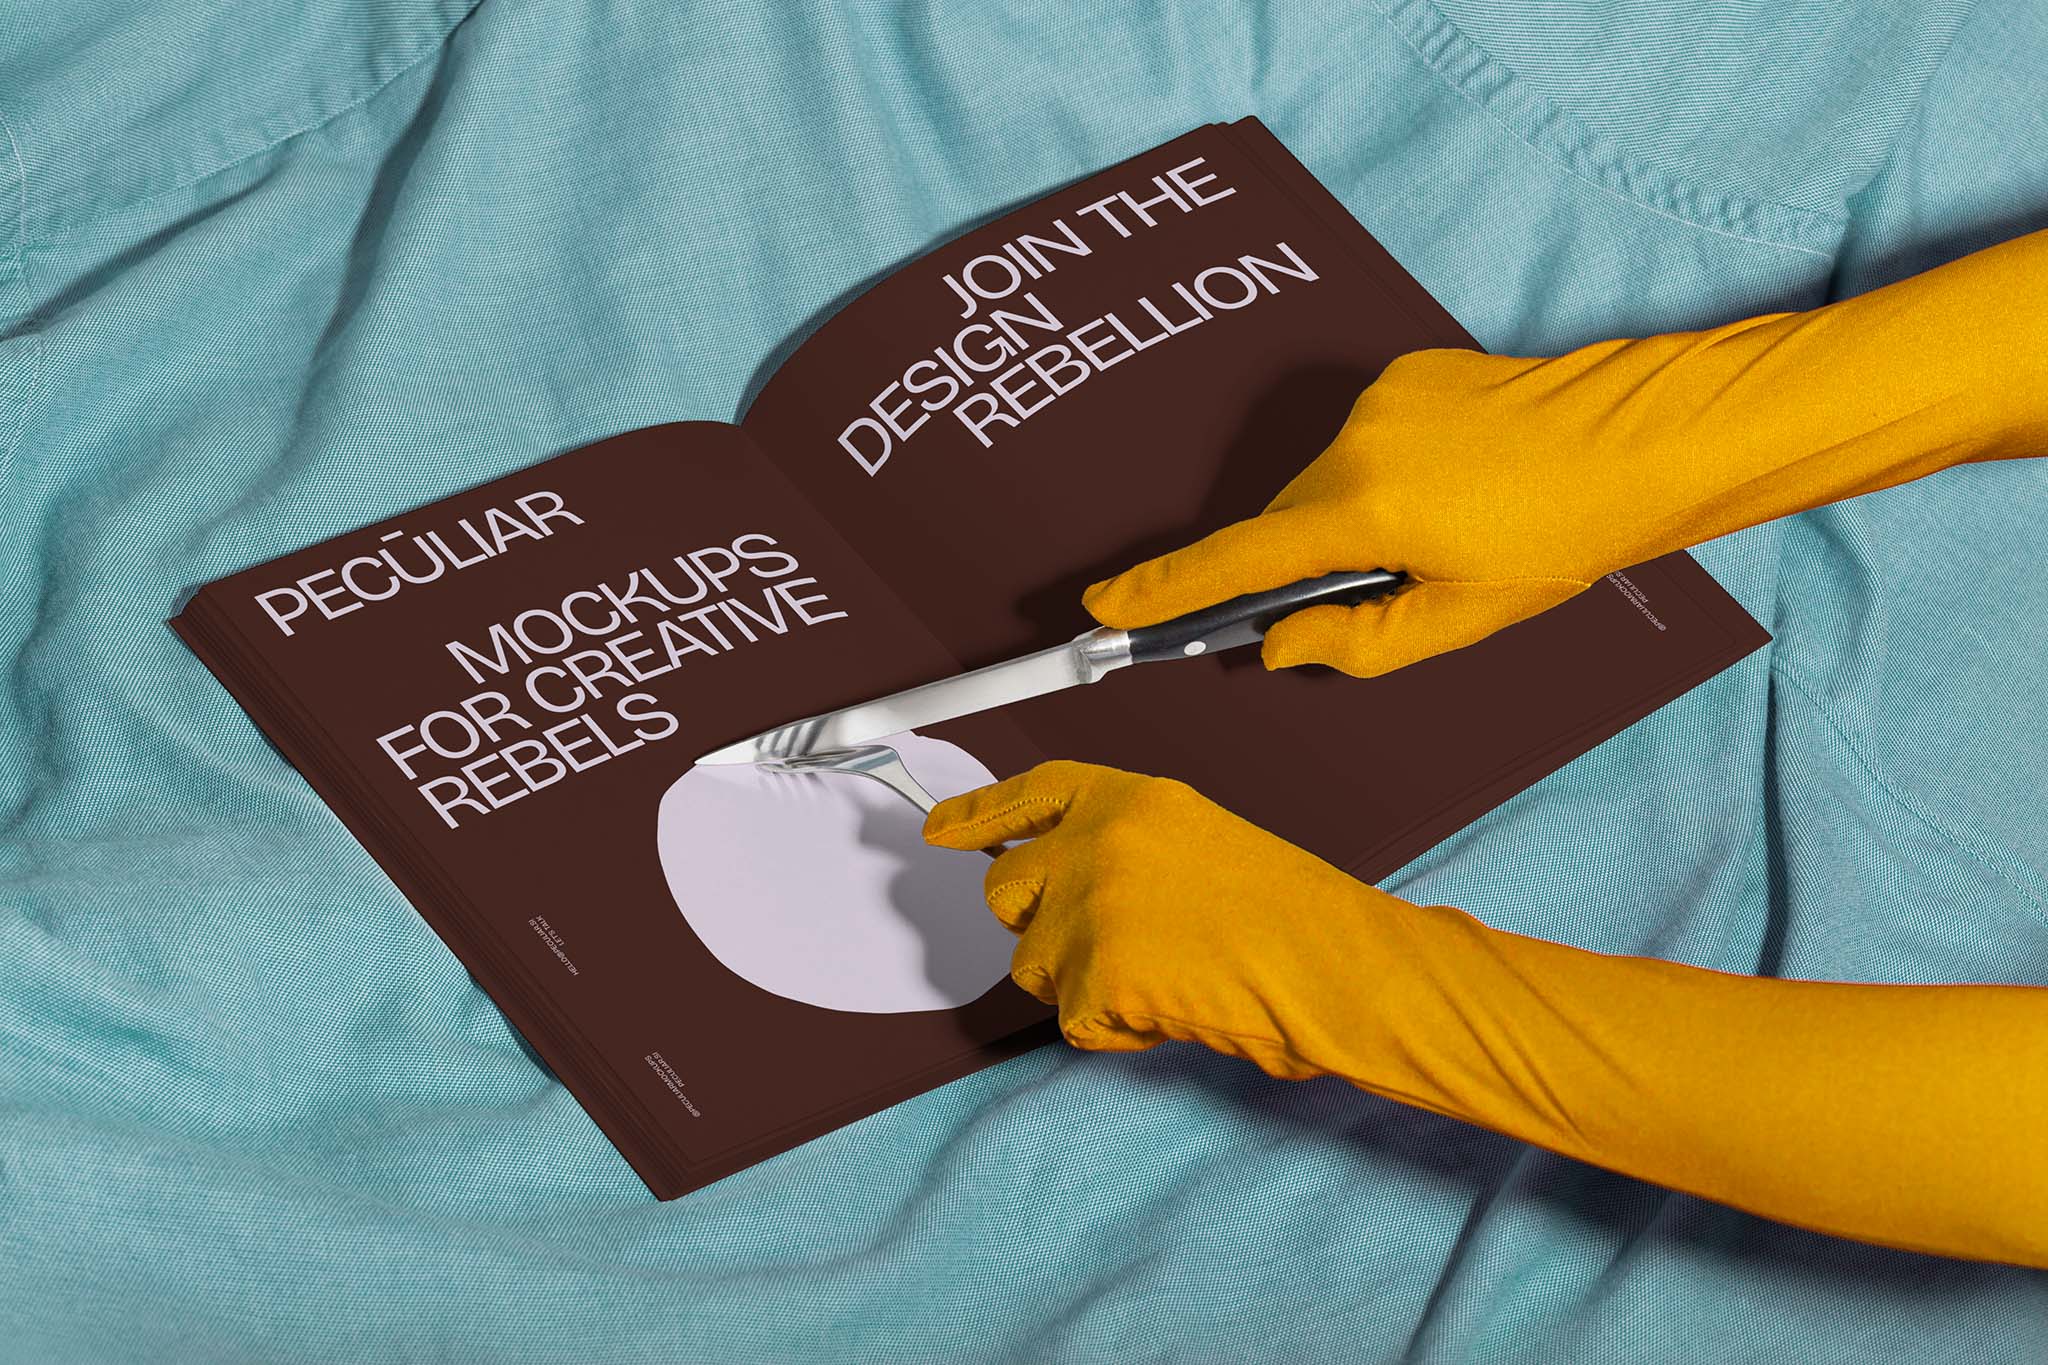 Two gloved hands holding utensils over an open book mockup set against light blue fabric, in use example.